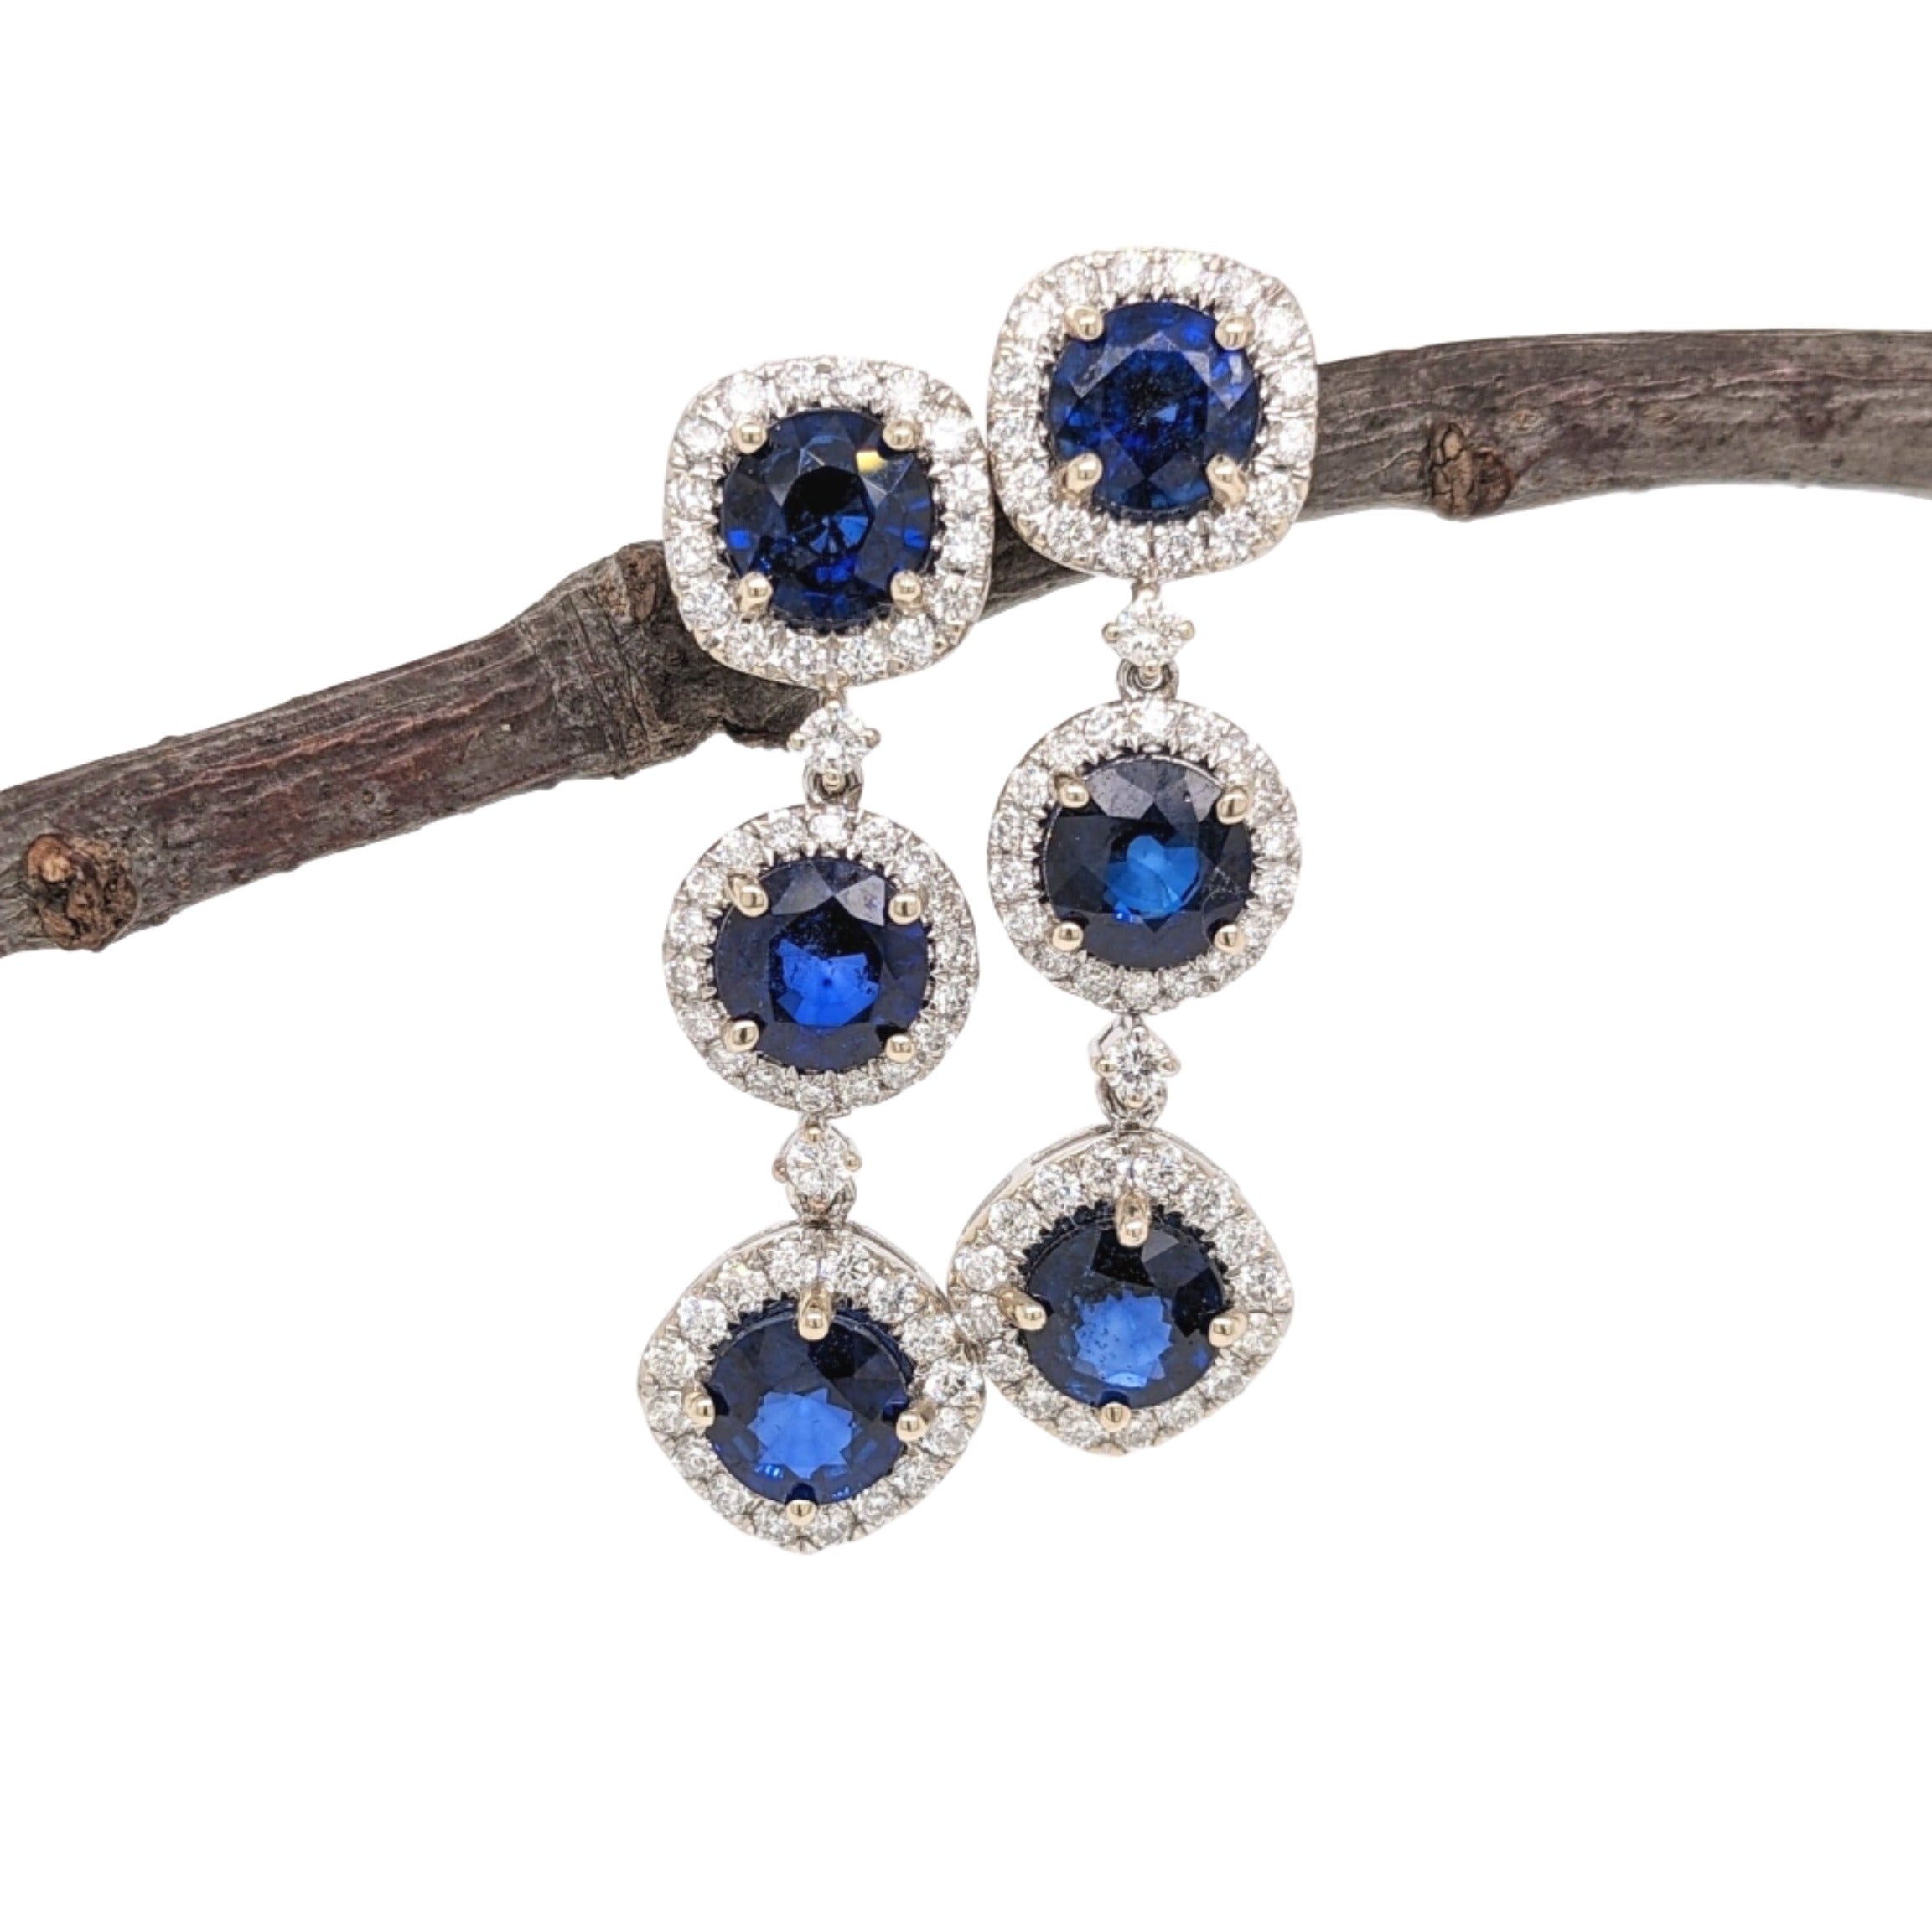 Dangly Blue Sapphire Earrings in 14K Gold w Natural Diamond Accents | Drop Earrings | Round 6mm | Blue Gems | September Birthstone